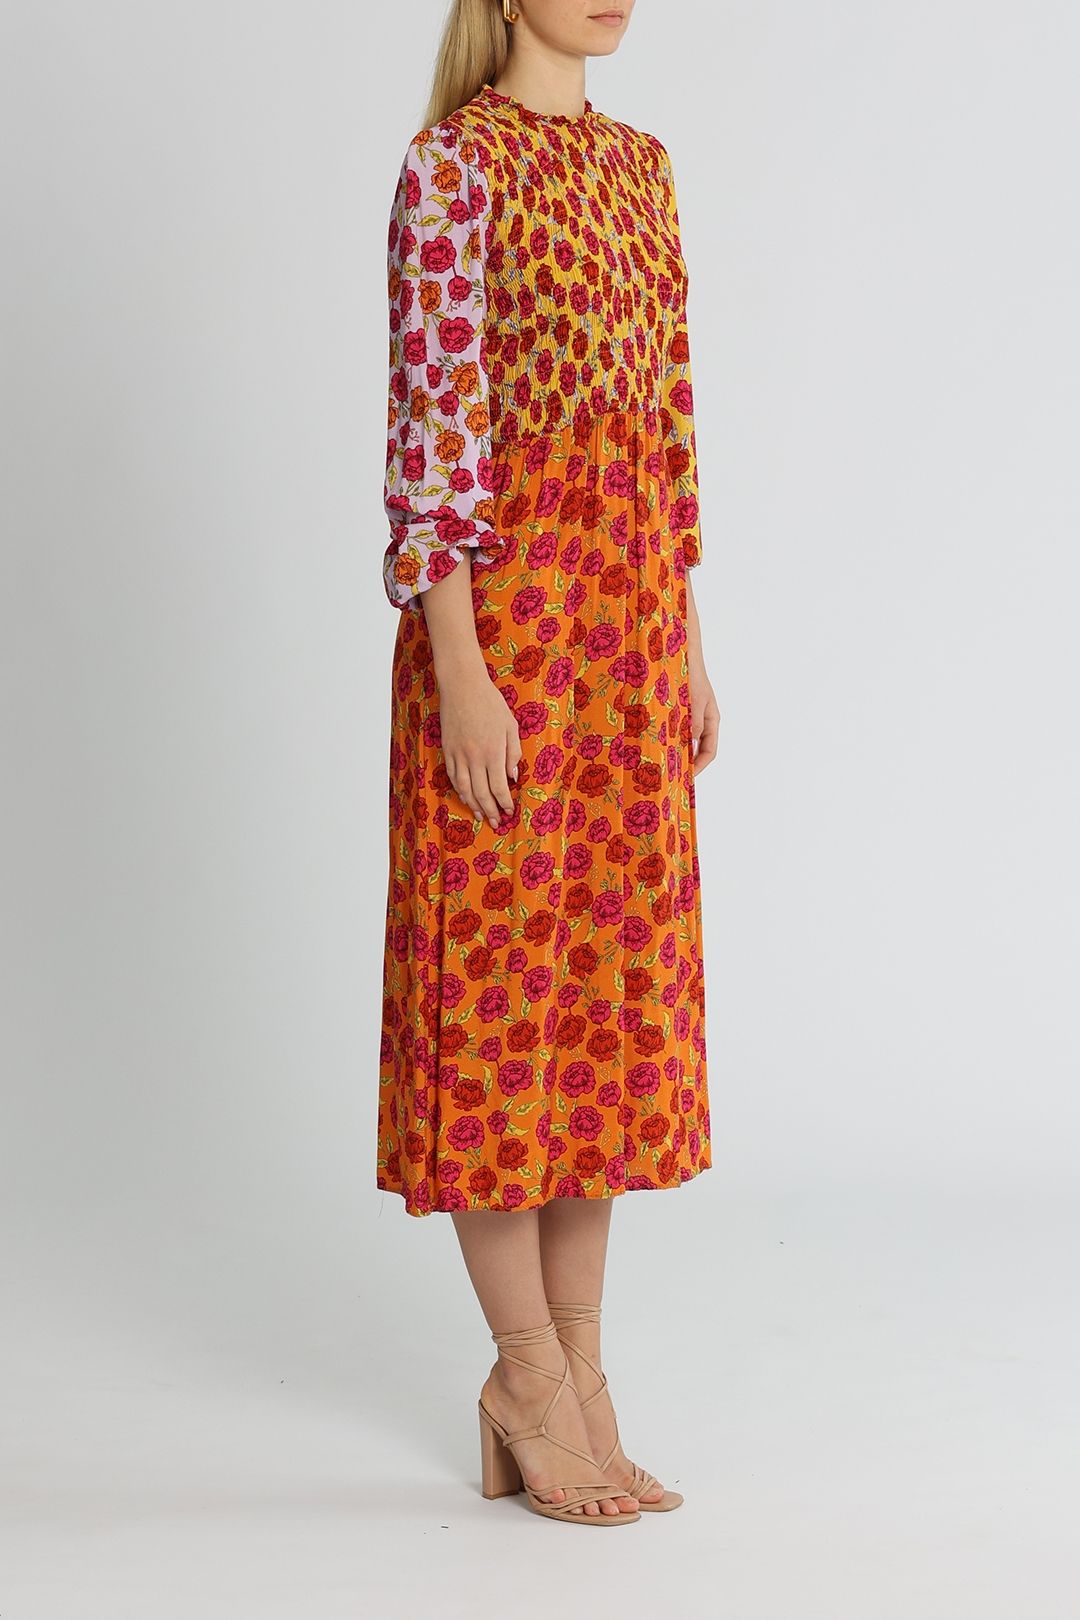 Never Fully Dressed Floral Clash Dress Balloon Sleeves